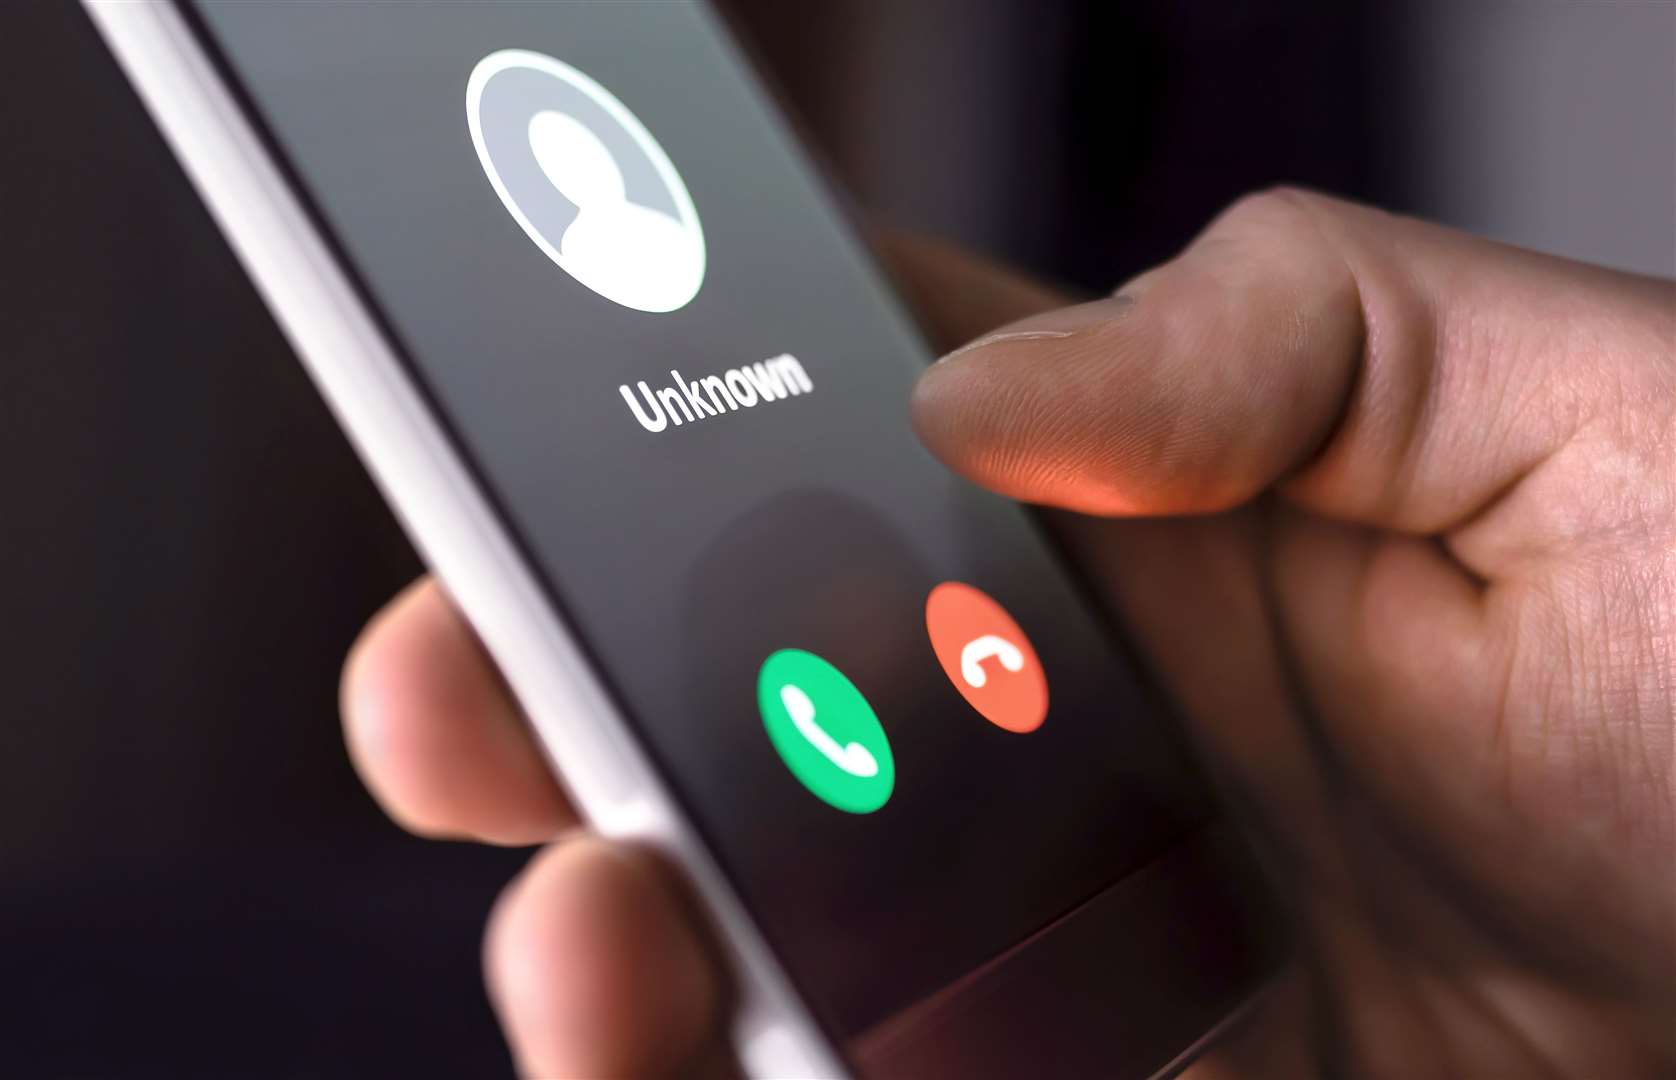 Phone call from unknown number late at night can signal a fraudulent caller.